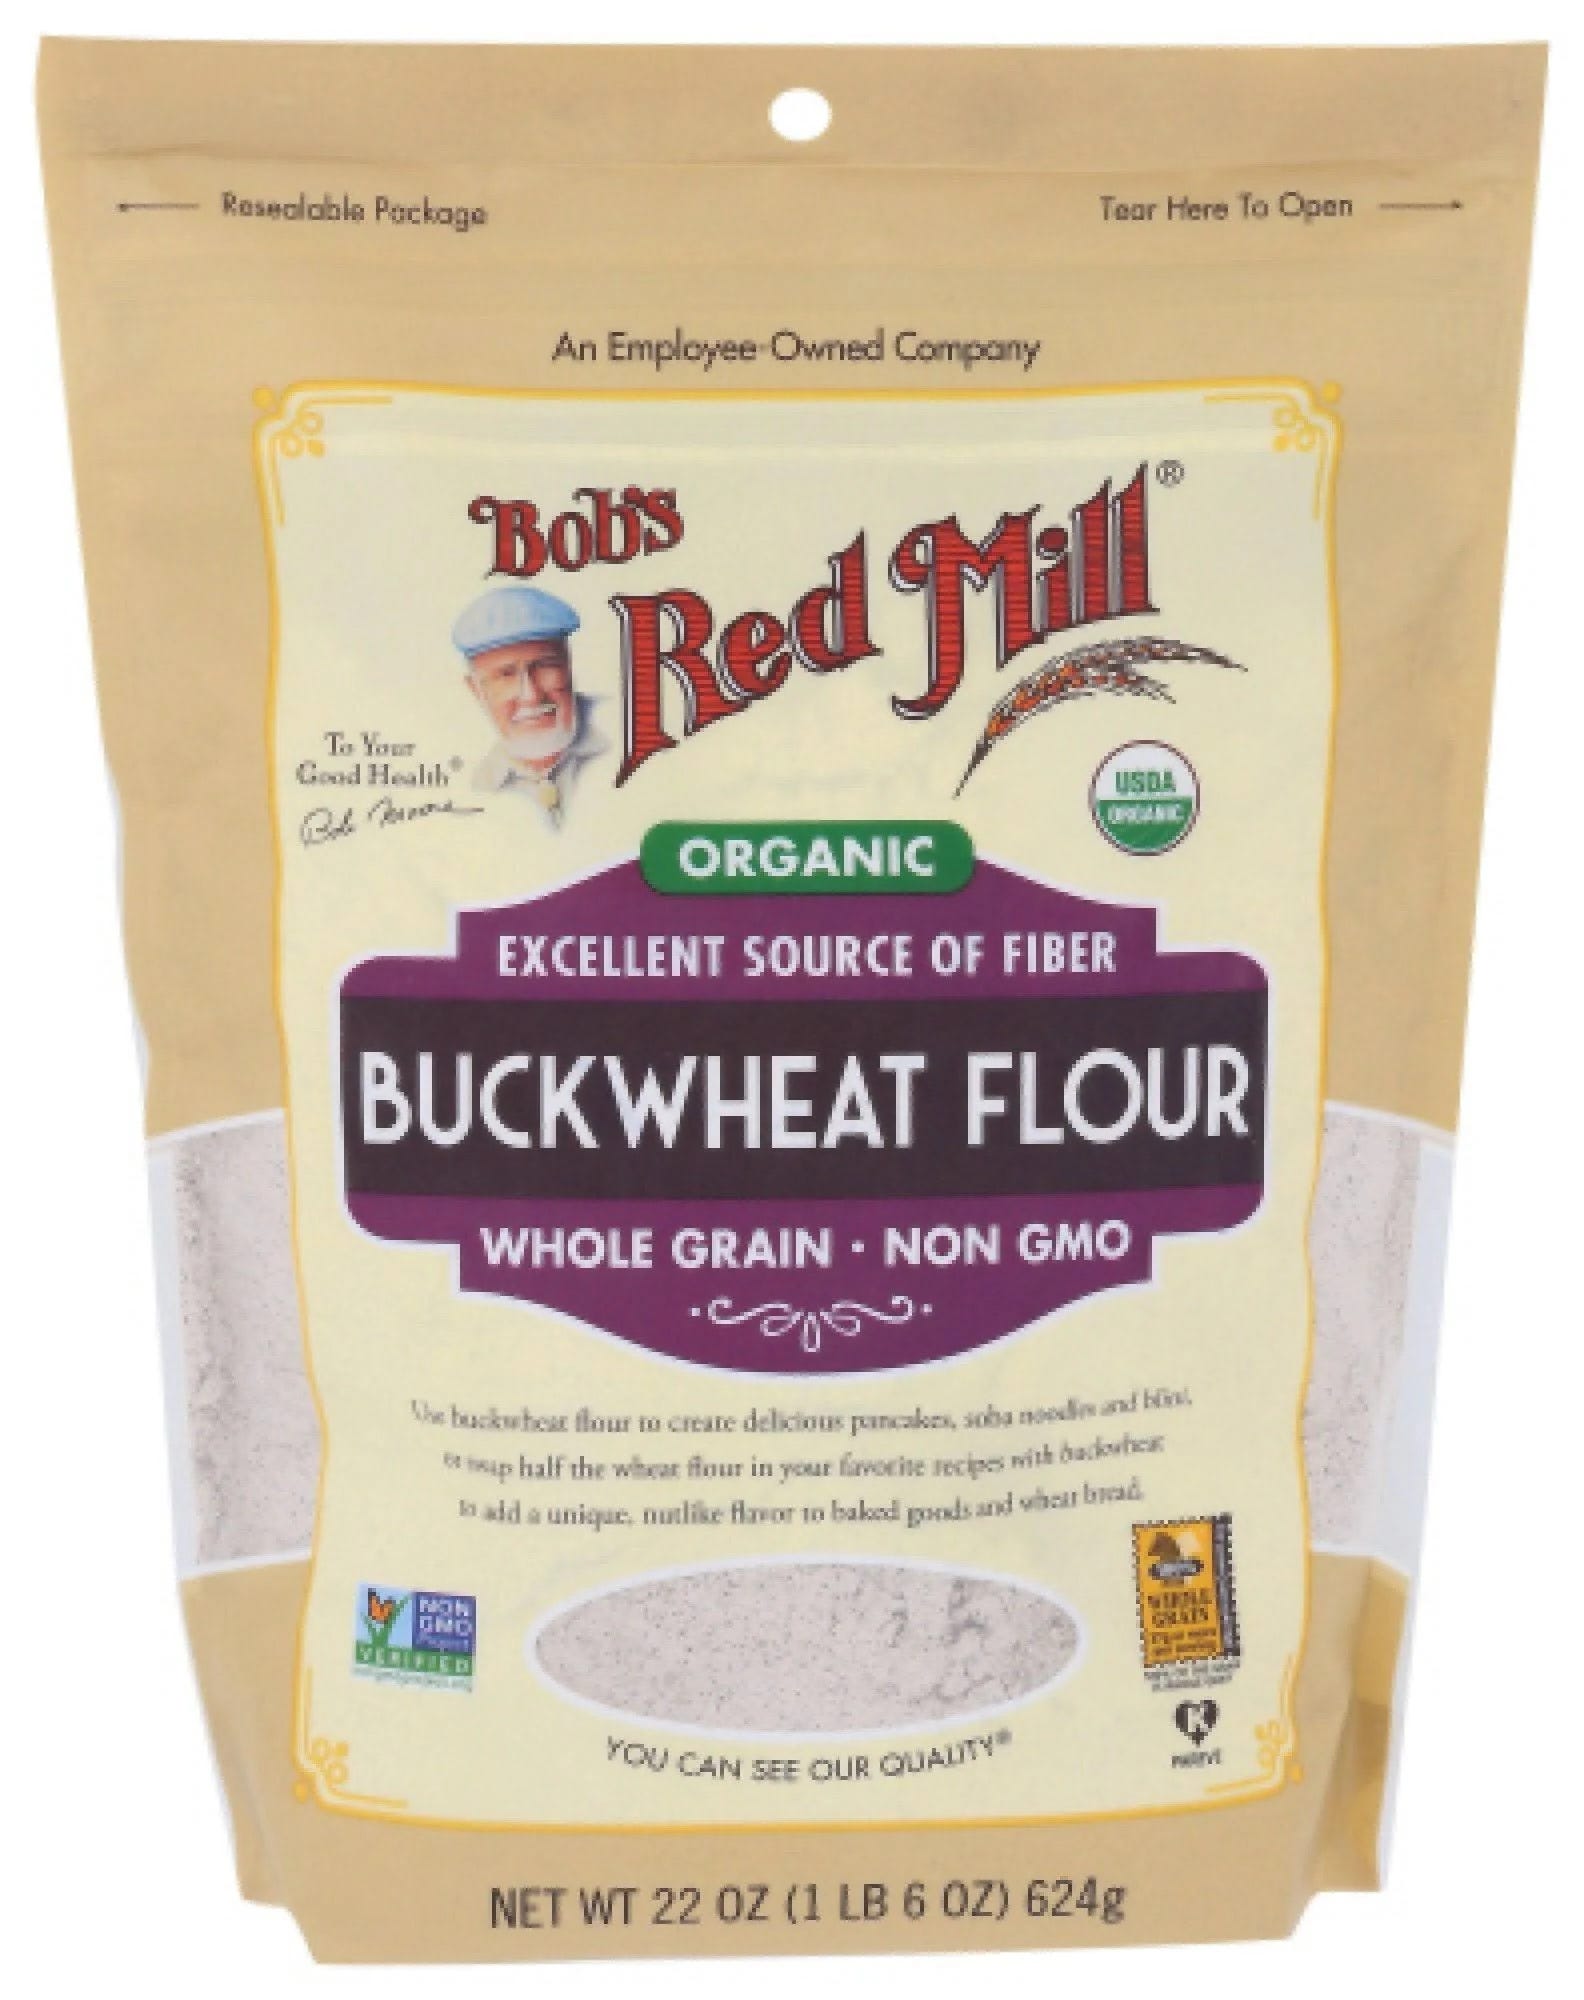 Organic Buckwheat Flour: A Nutritious and Flavorful Baking Option | Image